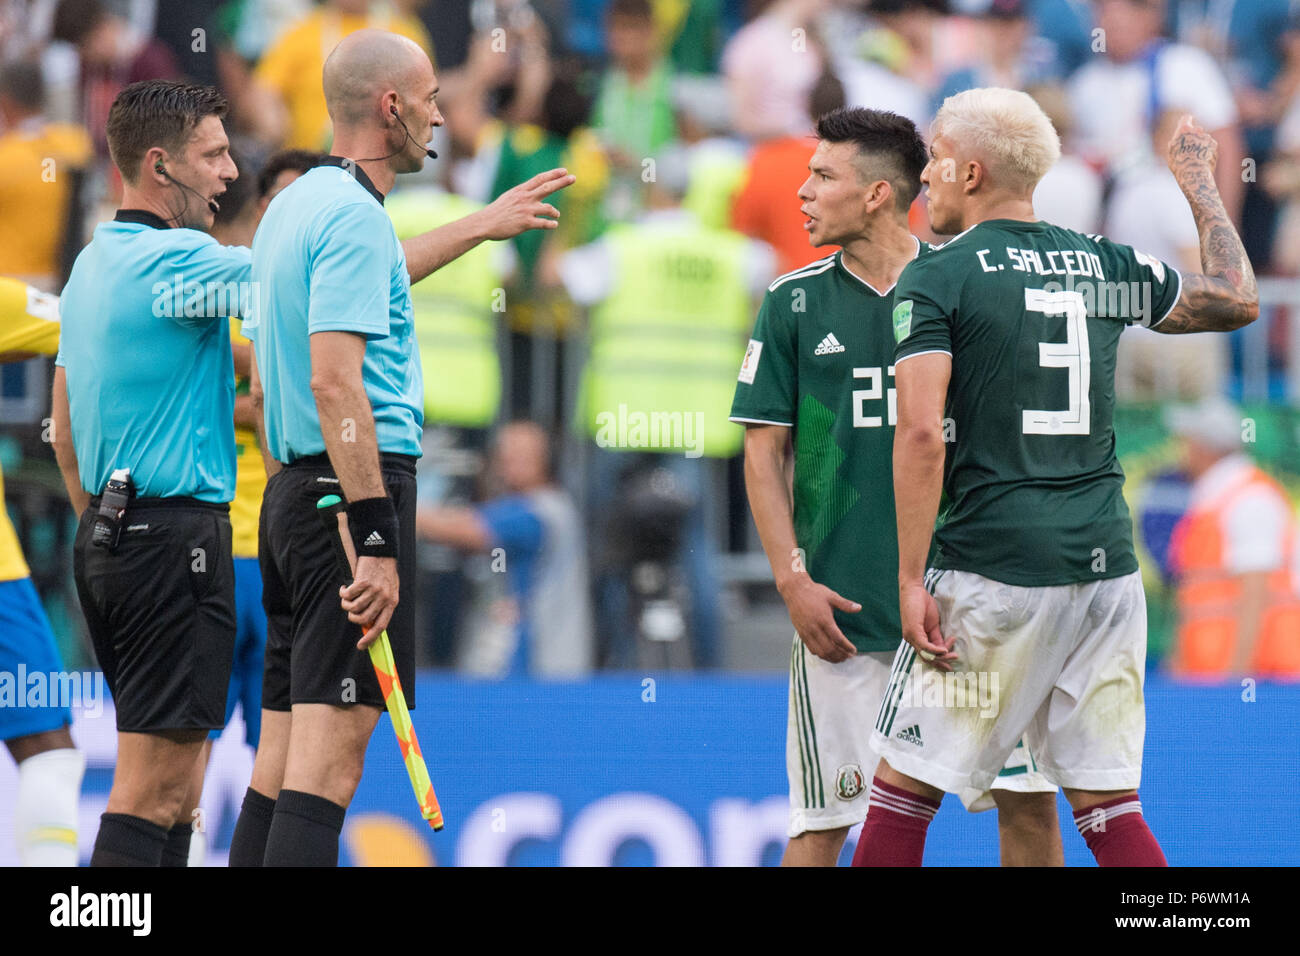 Samara, Russland. 02nd July, 2018. Hiring LOZANO (2nd right to left, MEX) and Carlos SALCEDO (right, MEX) are angry after the end of the game on referee Gianluca OCCHI (li., ITA), angry, anger, angry, anger, frustrated, frustrated, frozen, disappointed, showered, decapitation, disappointment, sad, gesture, gesture, half figure, half figure, Brazil (BRA) - Mexico (RUS) 2: 0, Round of 16, Game 53, on 02.07.2018 in Samara; Football World Cup 2018 in Russia from 14.06. - 15.07.2018. | usage worldwide Credit: dpa/Alamy Live News Stock Photo